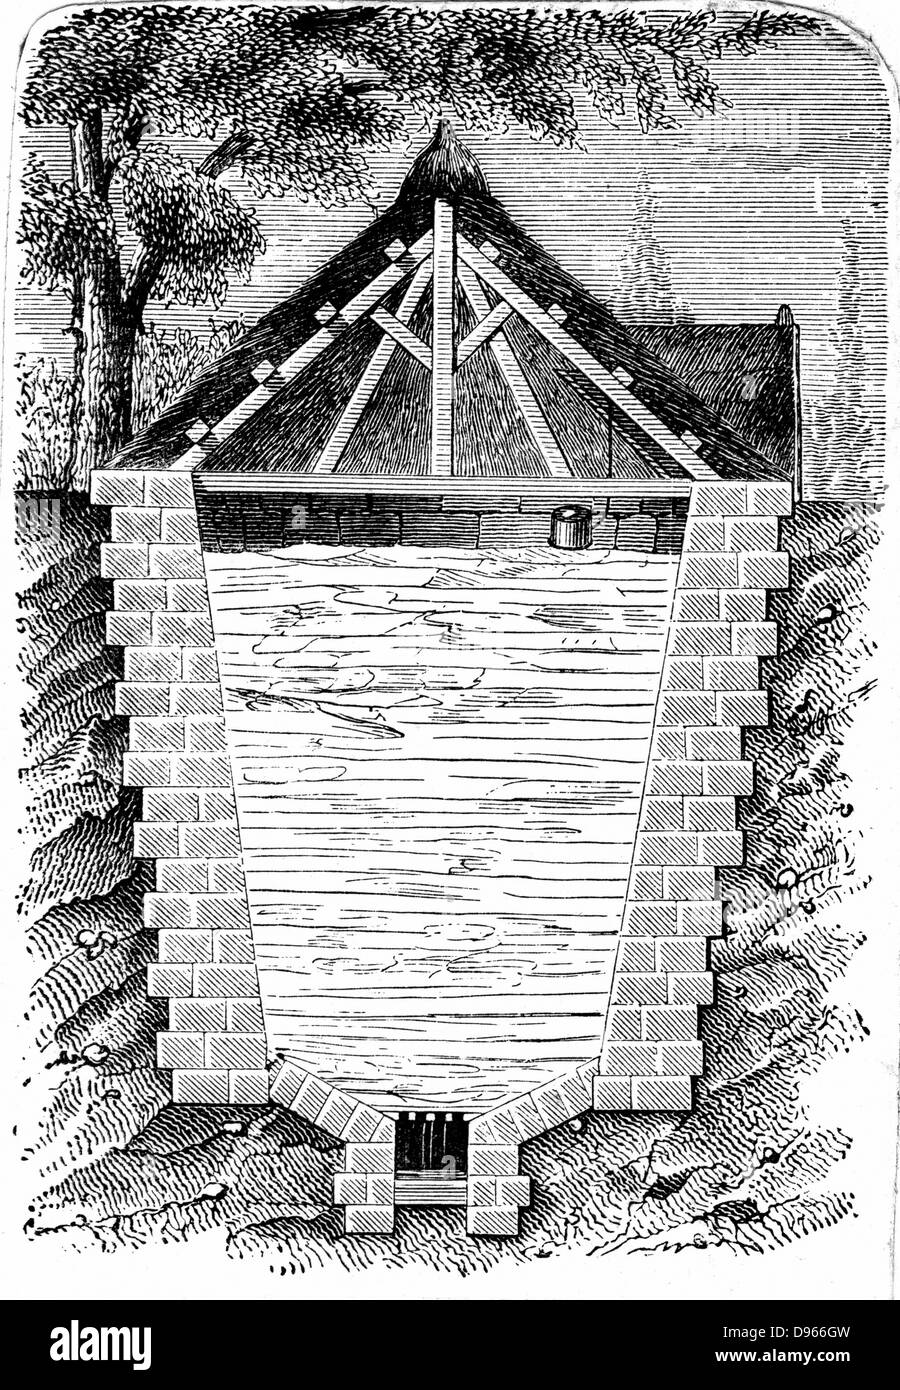 Refrigeration: Sectional view of ice-house. Pit dug and lined with brick, poor conductor of heat. Roof covered with thatch for same reason. Each piece of ice dipped in water before packed in ice-house, so forming solid mass with minimum surface area exposed. Drain at bottom. Wood engraving, Paris, 1874 Stock Photo